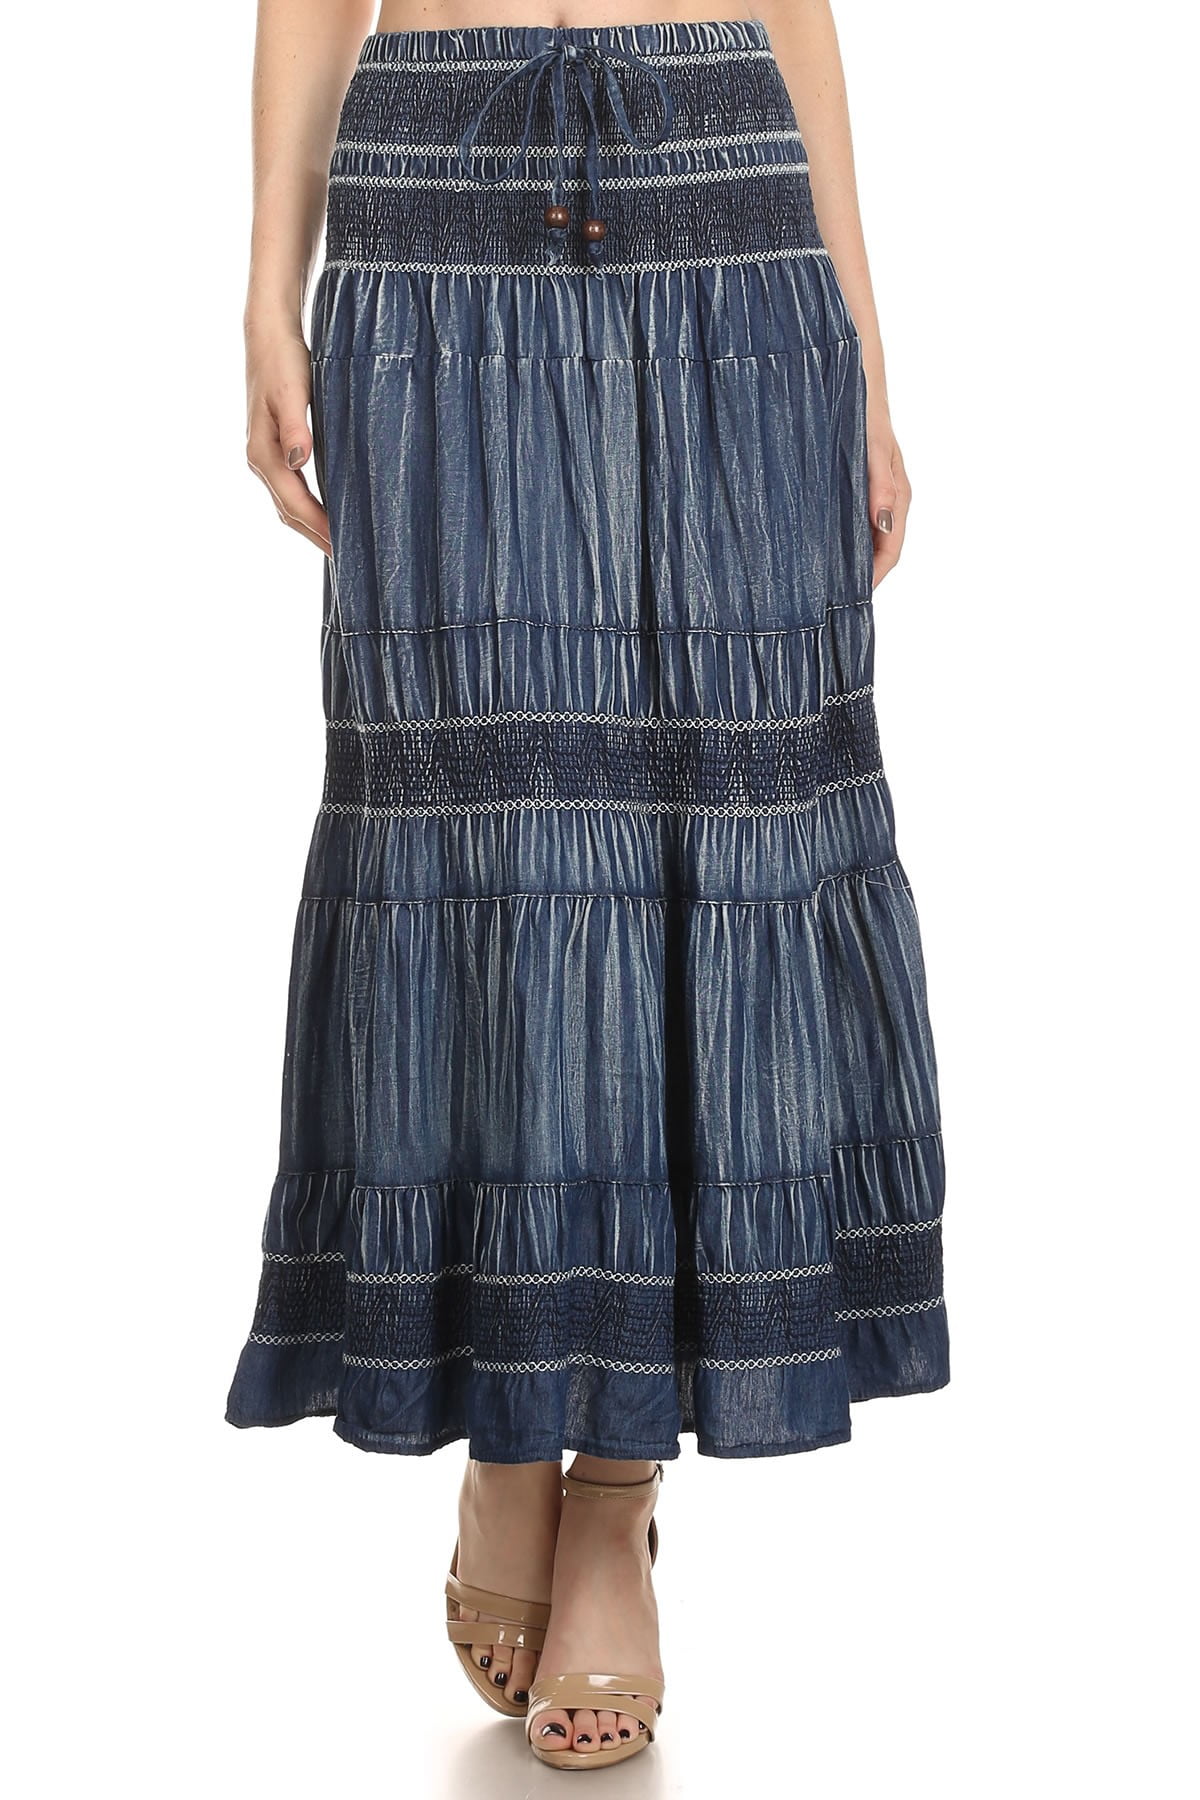 Fit and Flare Tiered Layers Denim Skirt or Midi Dress Smocked Strapless ...